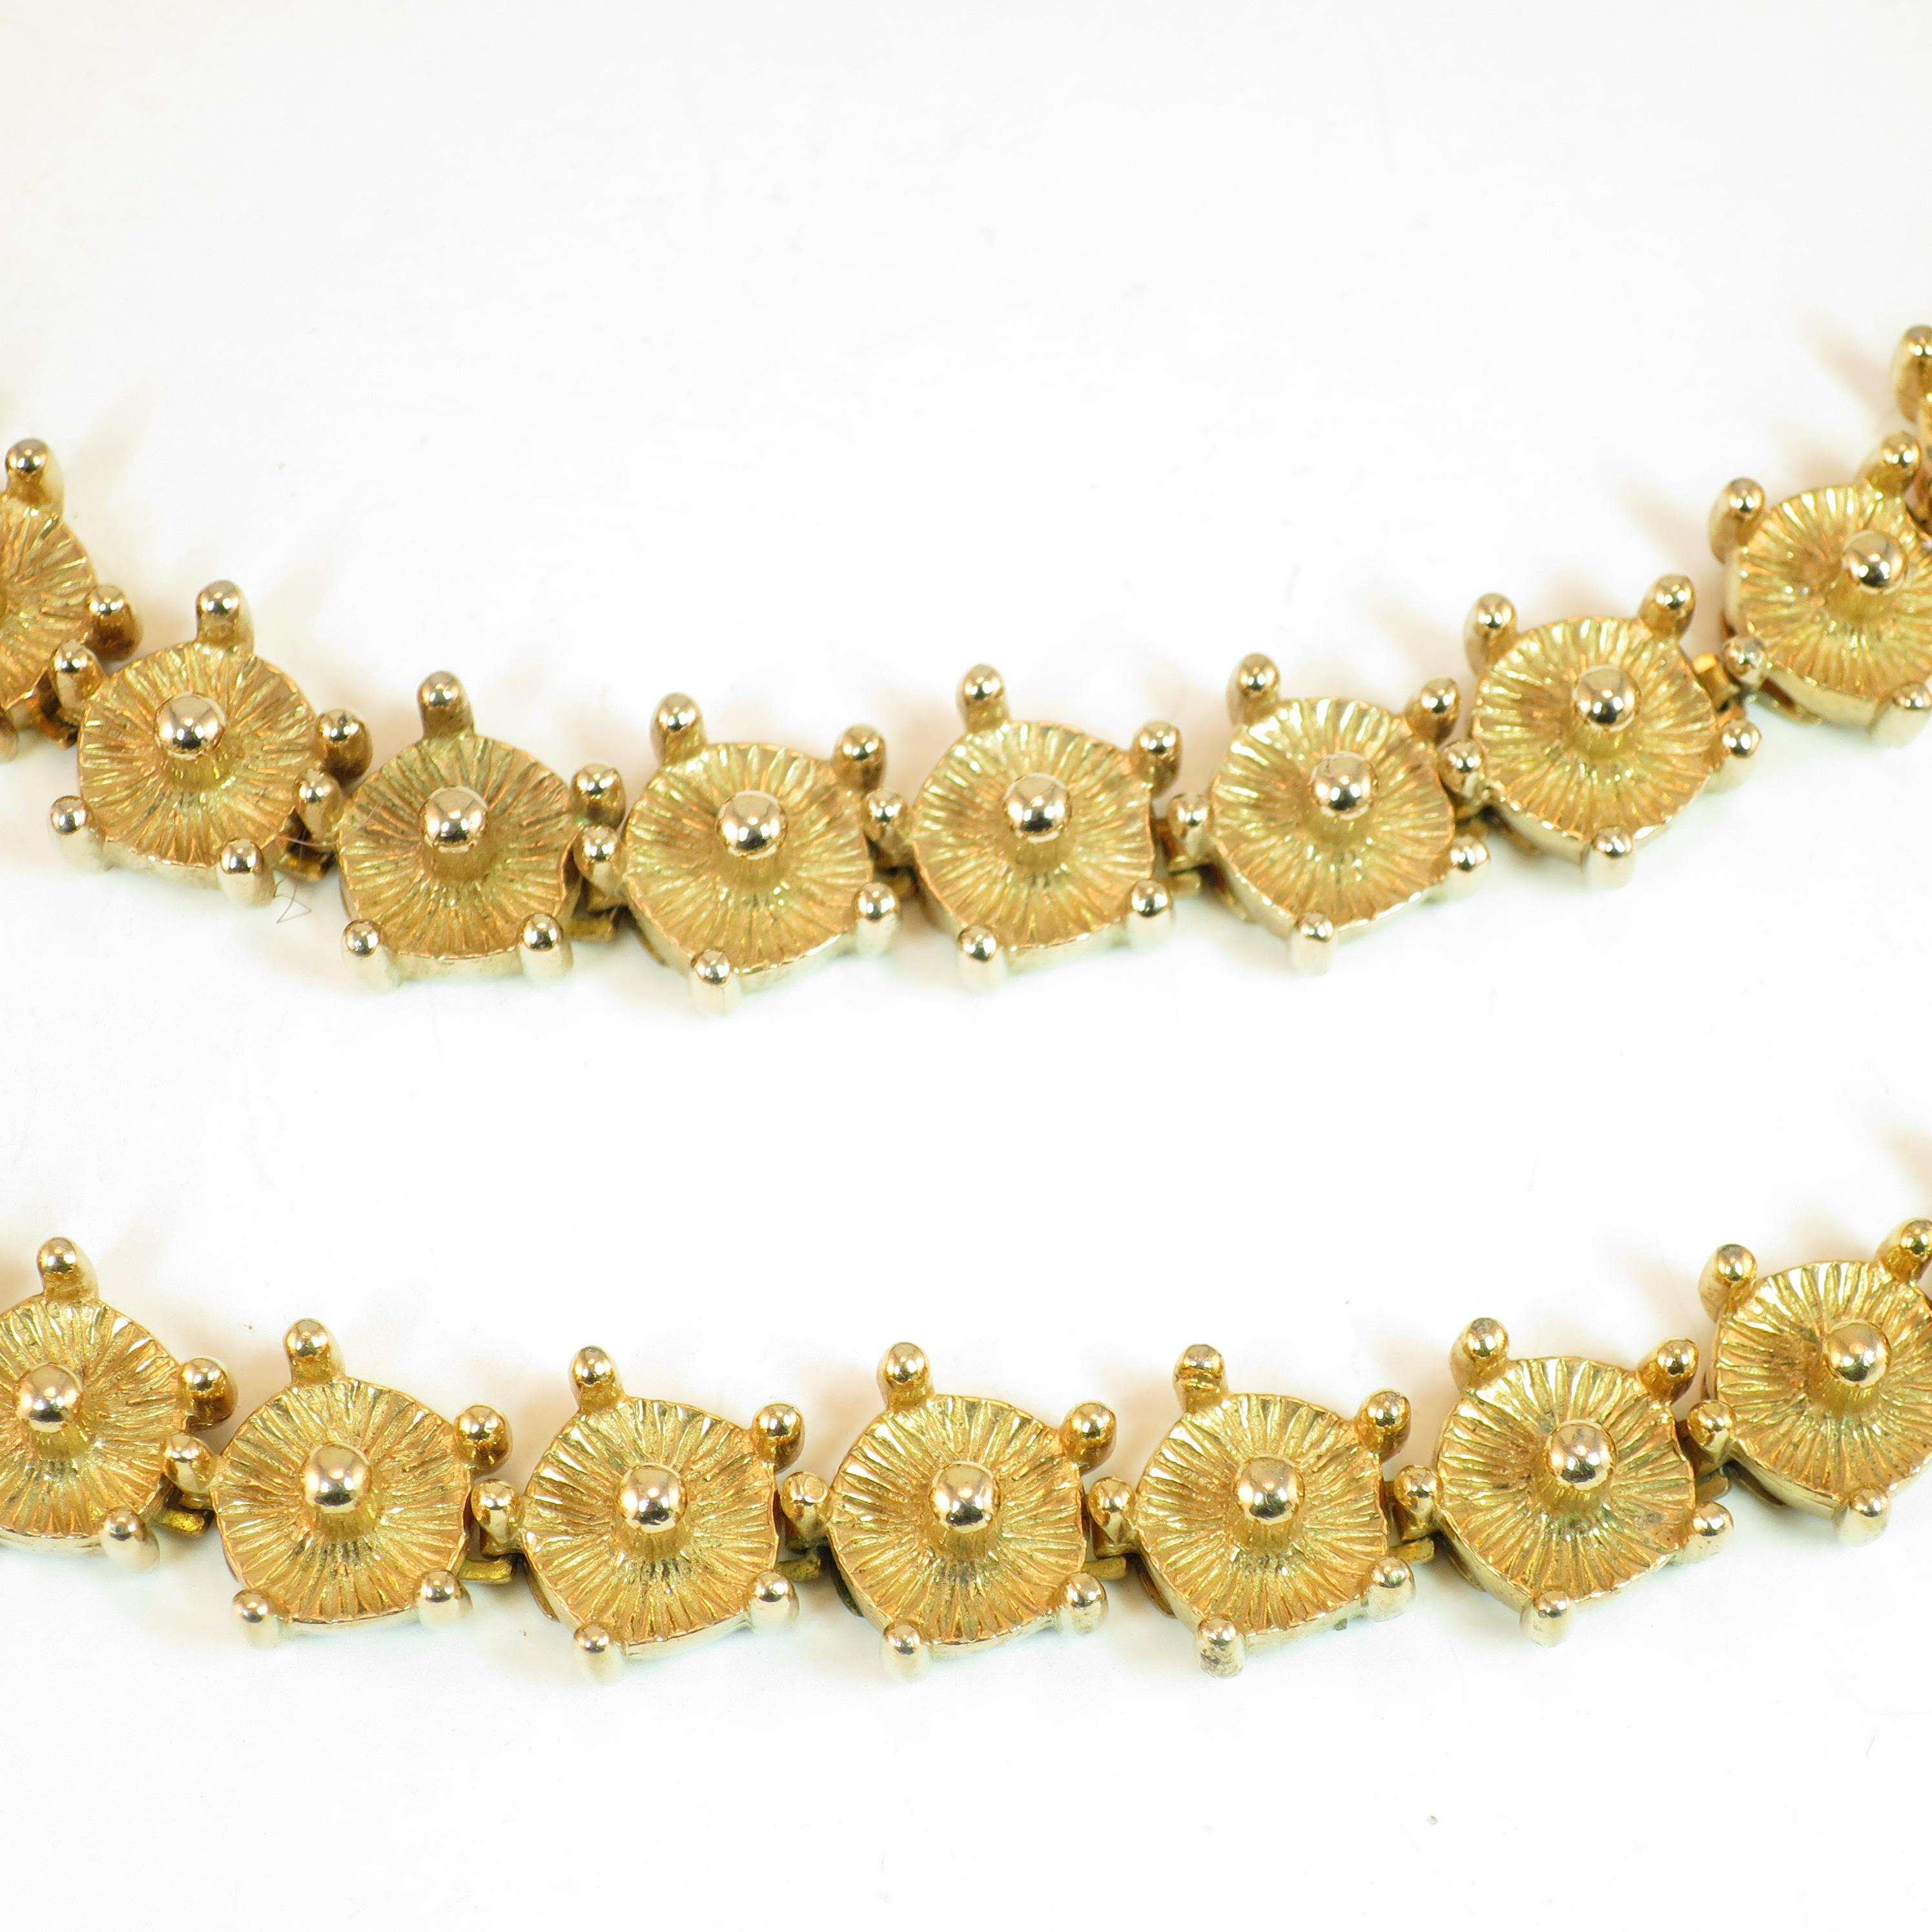 Offered here is a Mid-Century Modern Castlecliff choker necklace and matching bracelet suite from the 1960s. Both pieces are graced with bright gold plating, and present a segmented geometric design of linked round platforms with an etched radiating